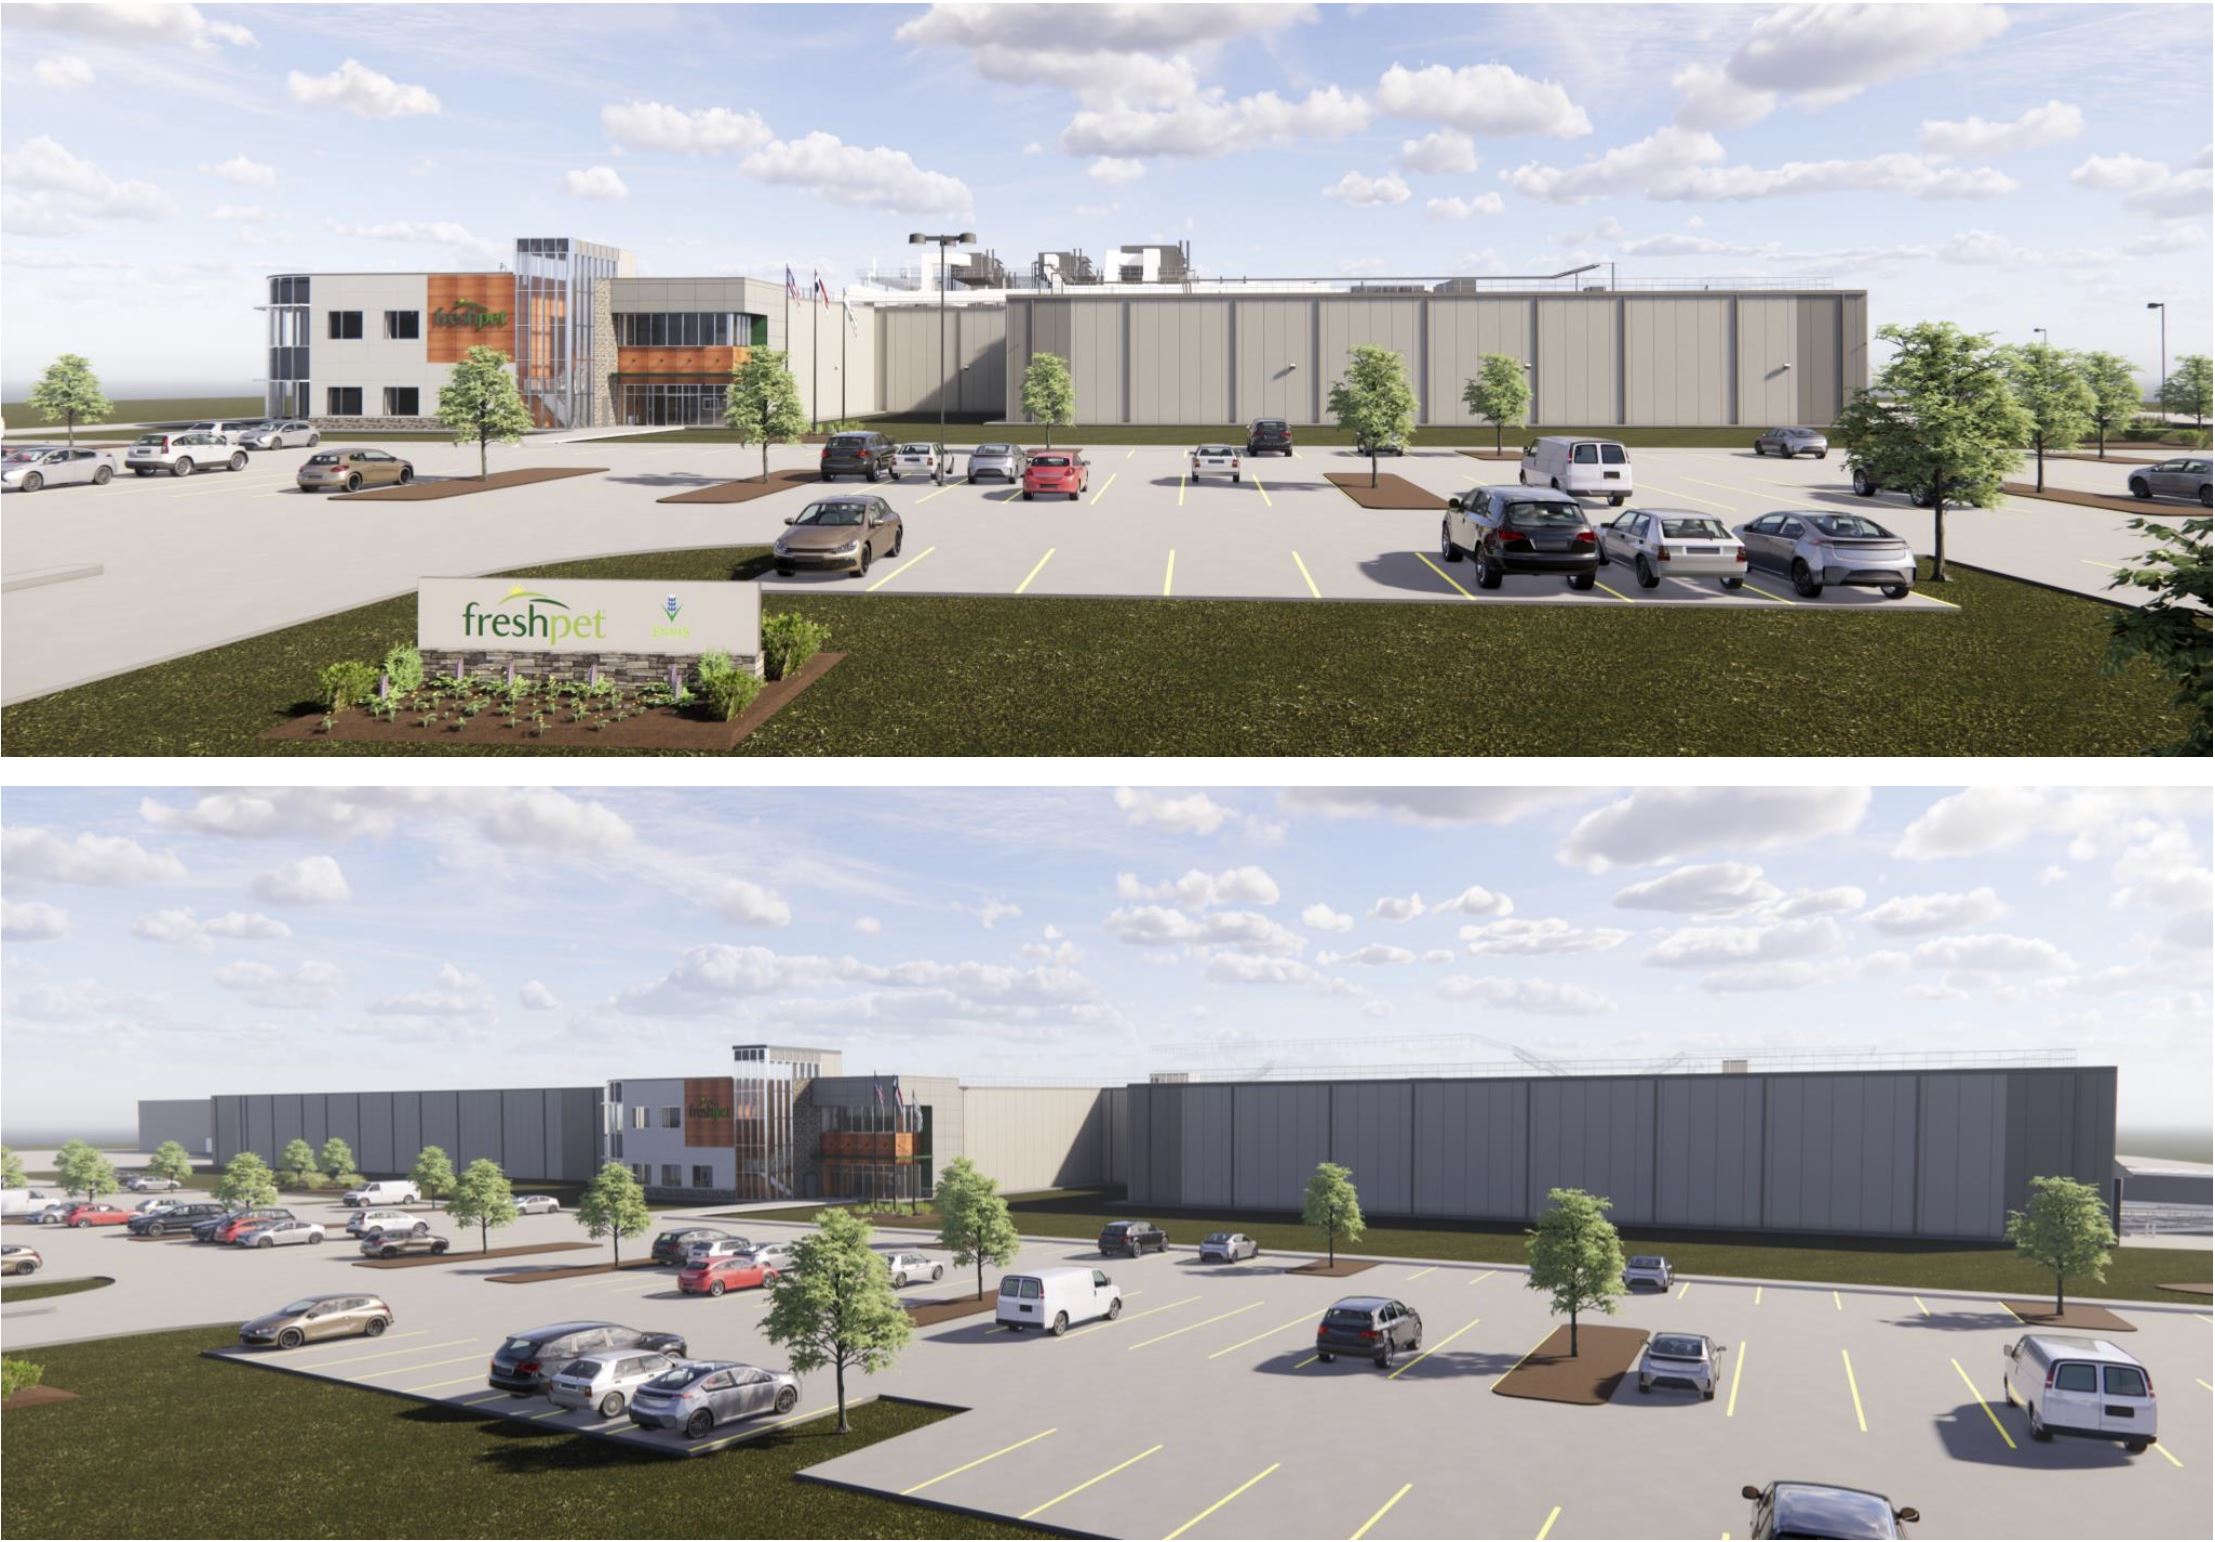 Renderings of Freshpet's Ennis, Texas facility based on construction phrases